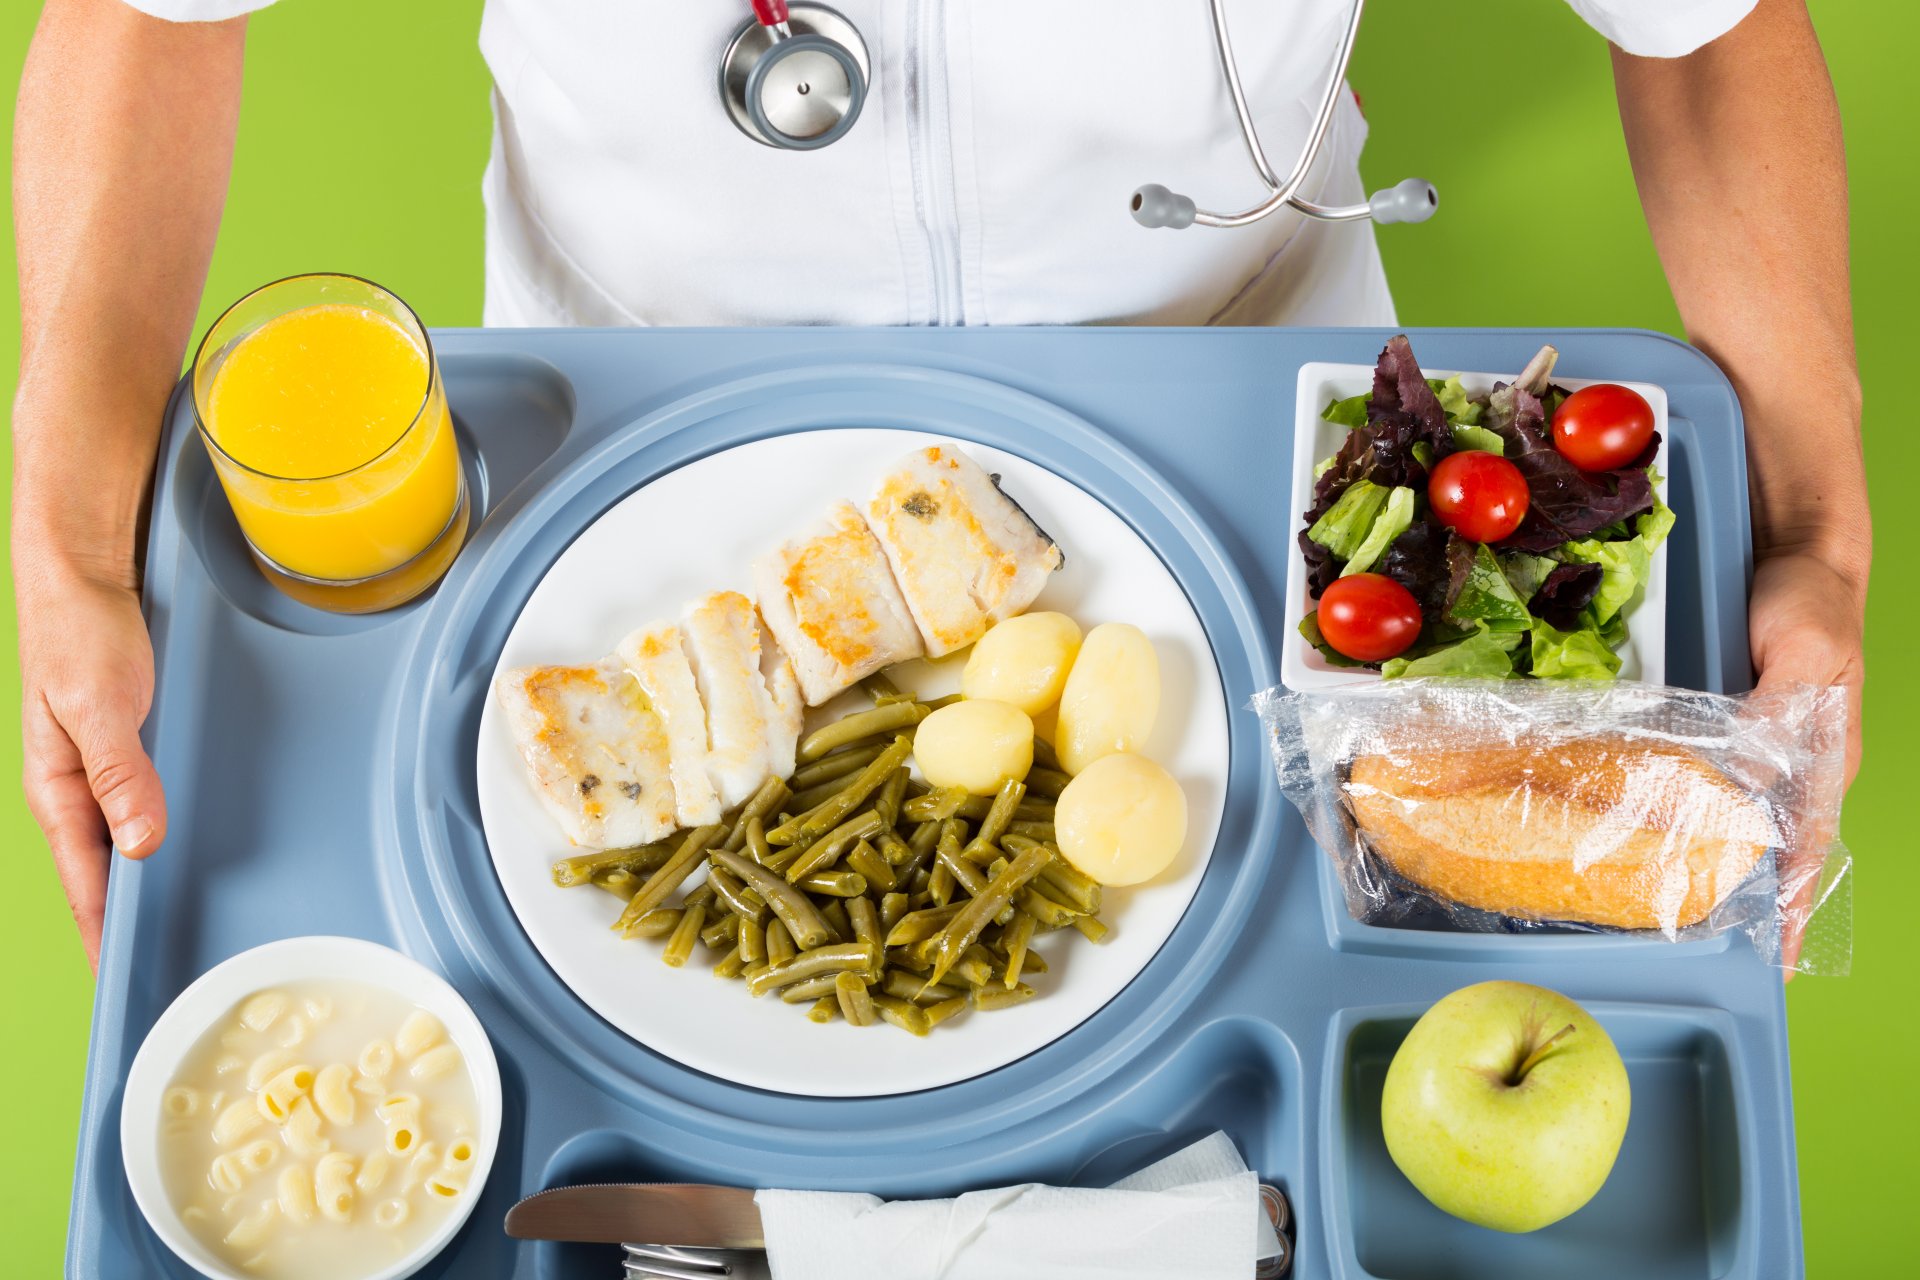 Doctor serves tray of healthy food